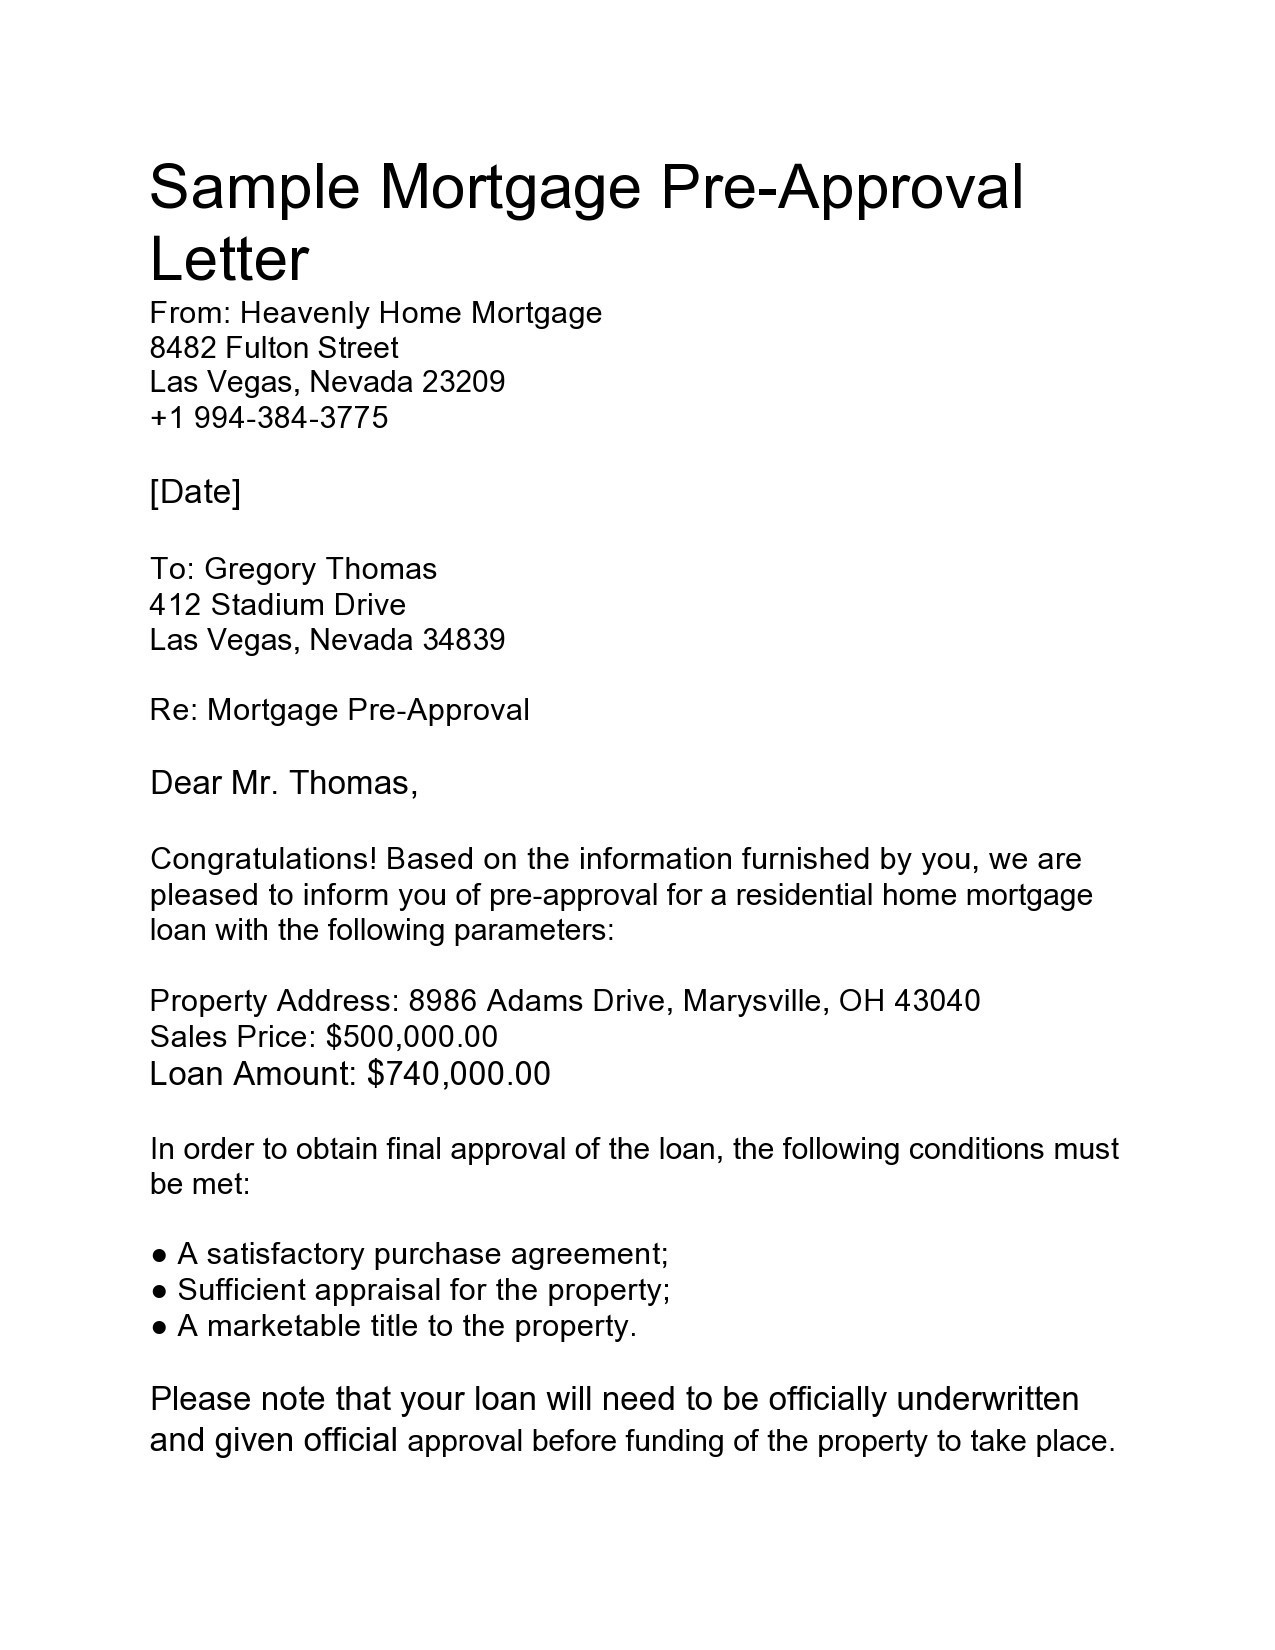 Free pre approval letter 38